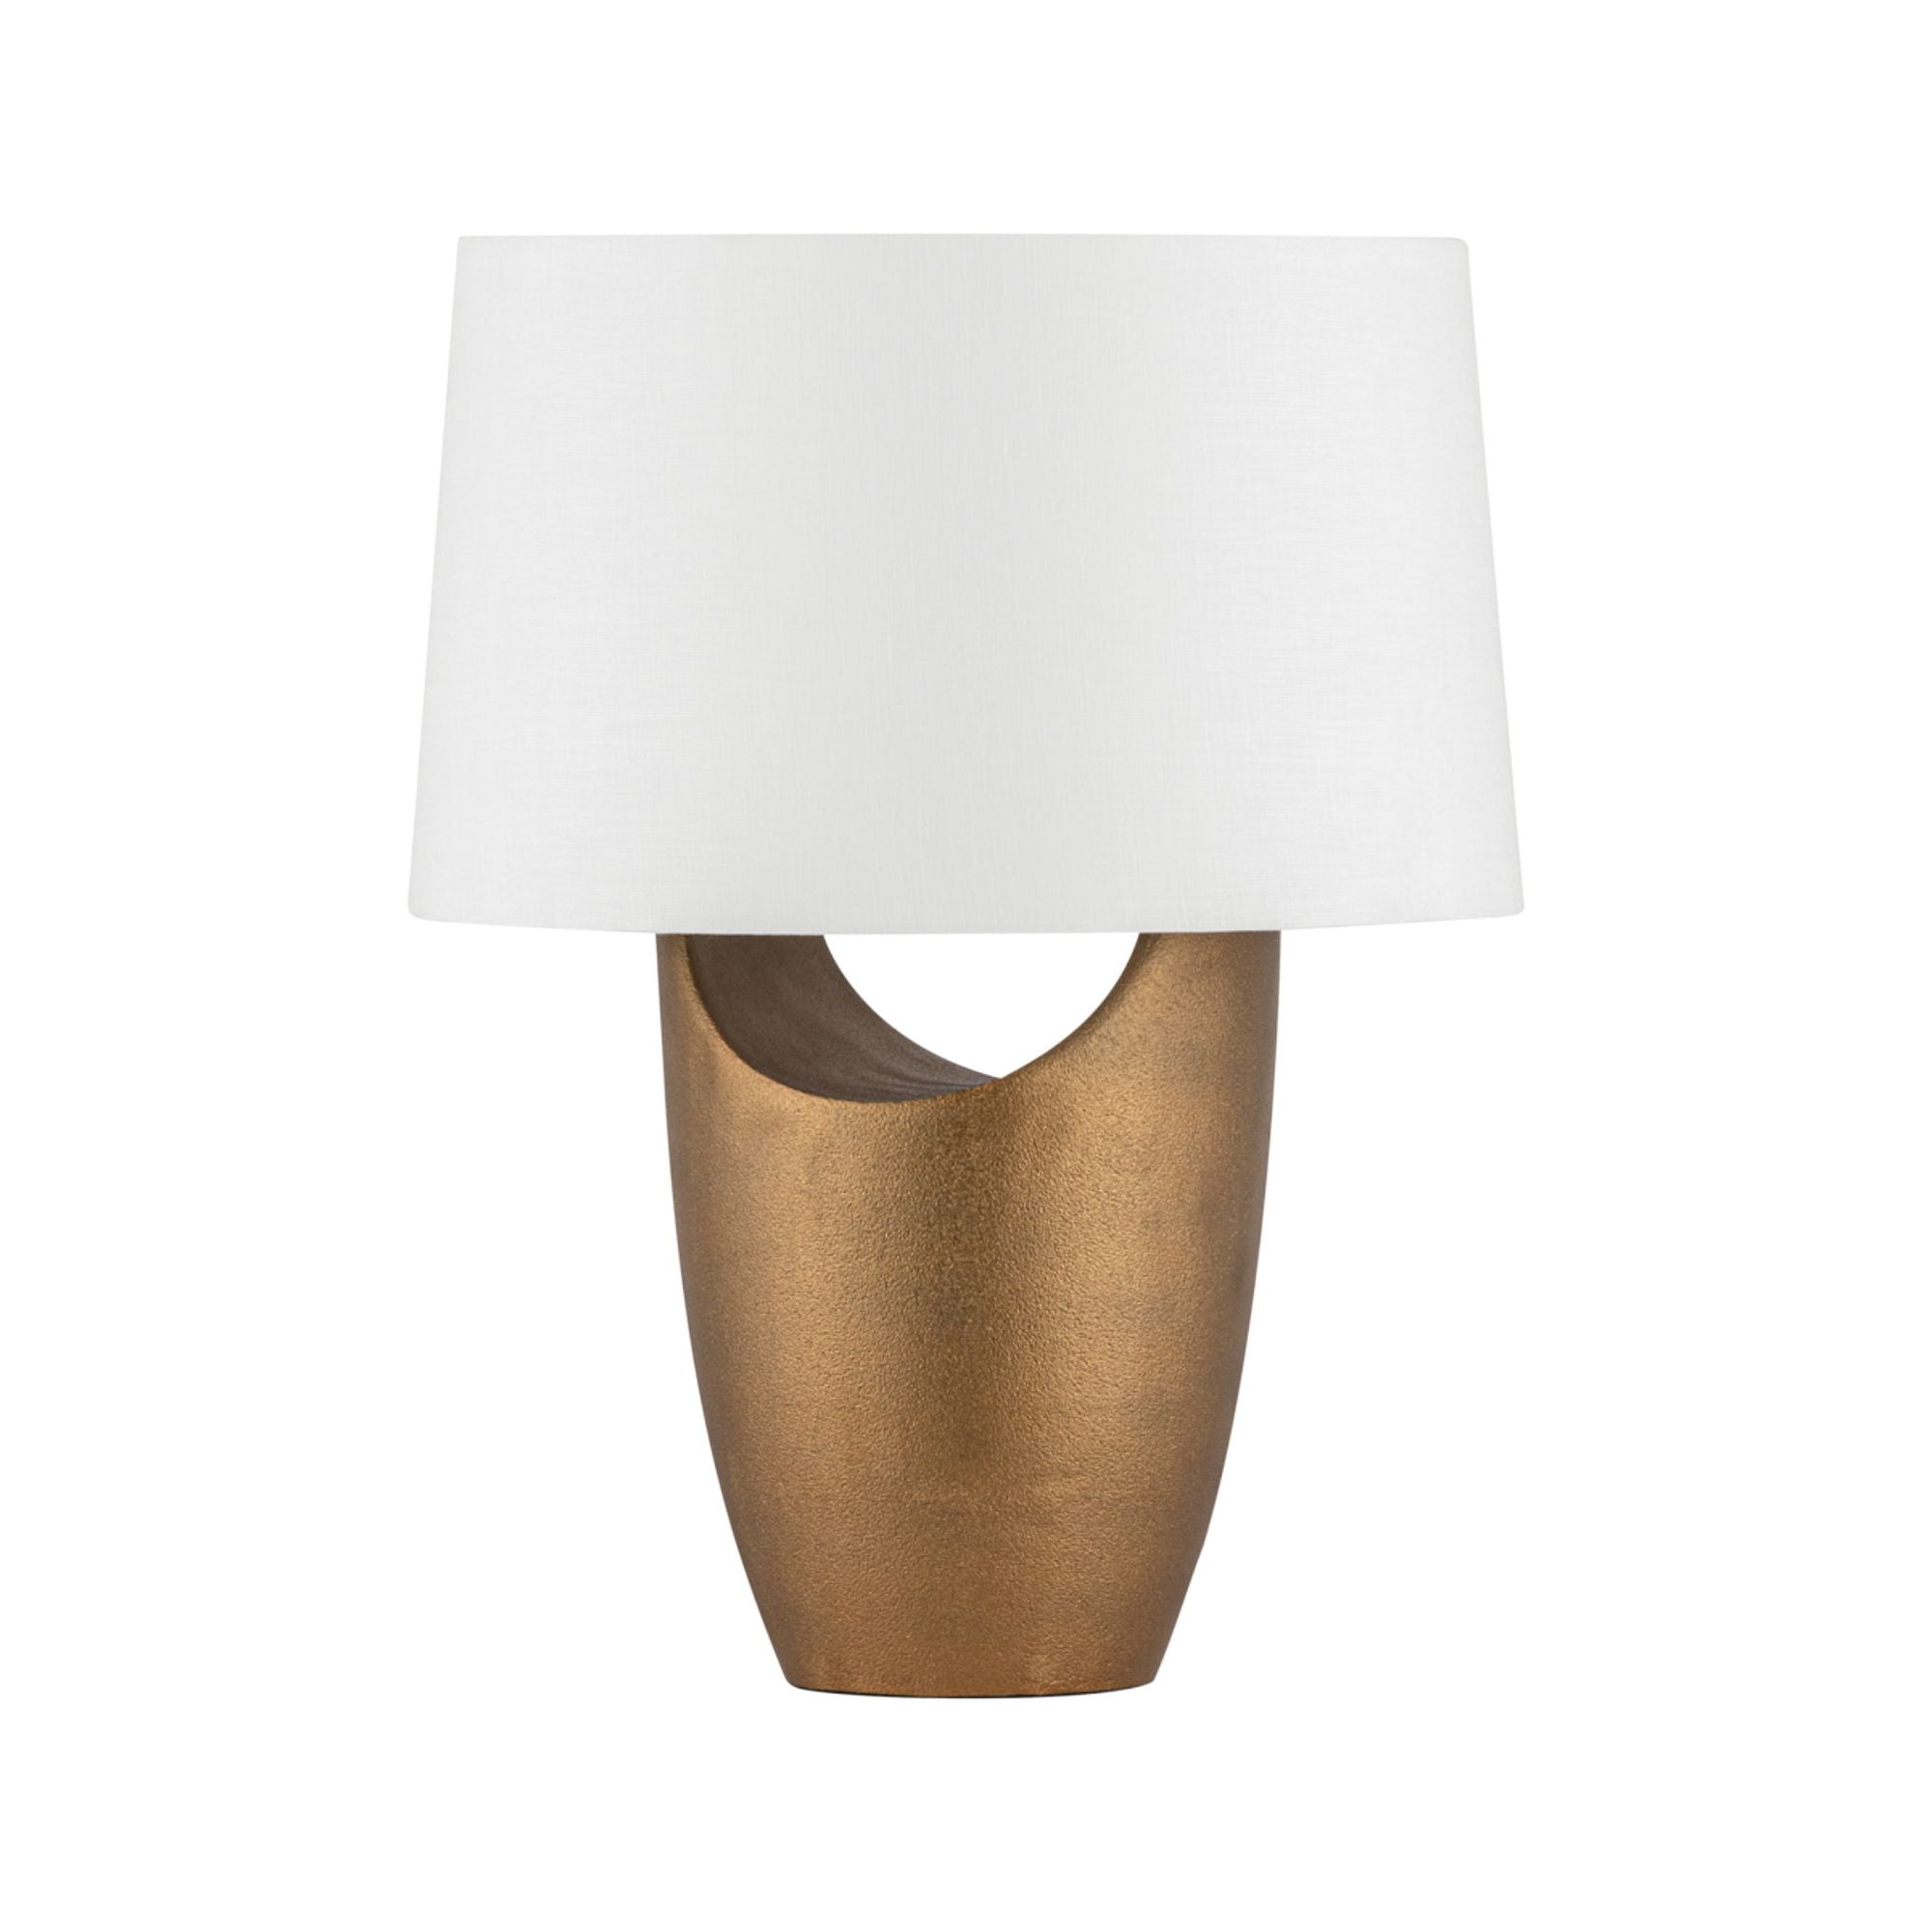 Kamay 2 Light Table Lamp in Aged Brass by Becki Owens